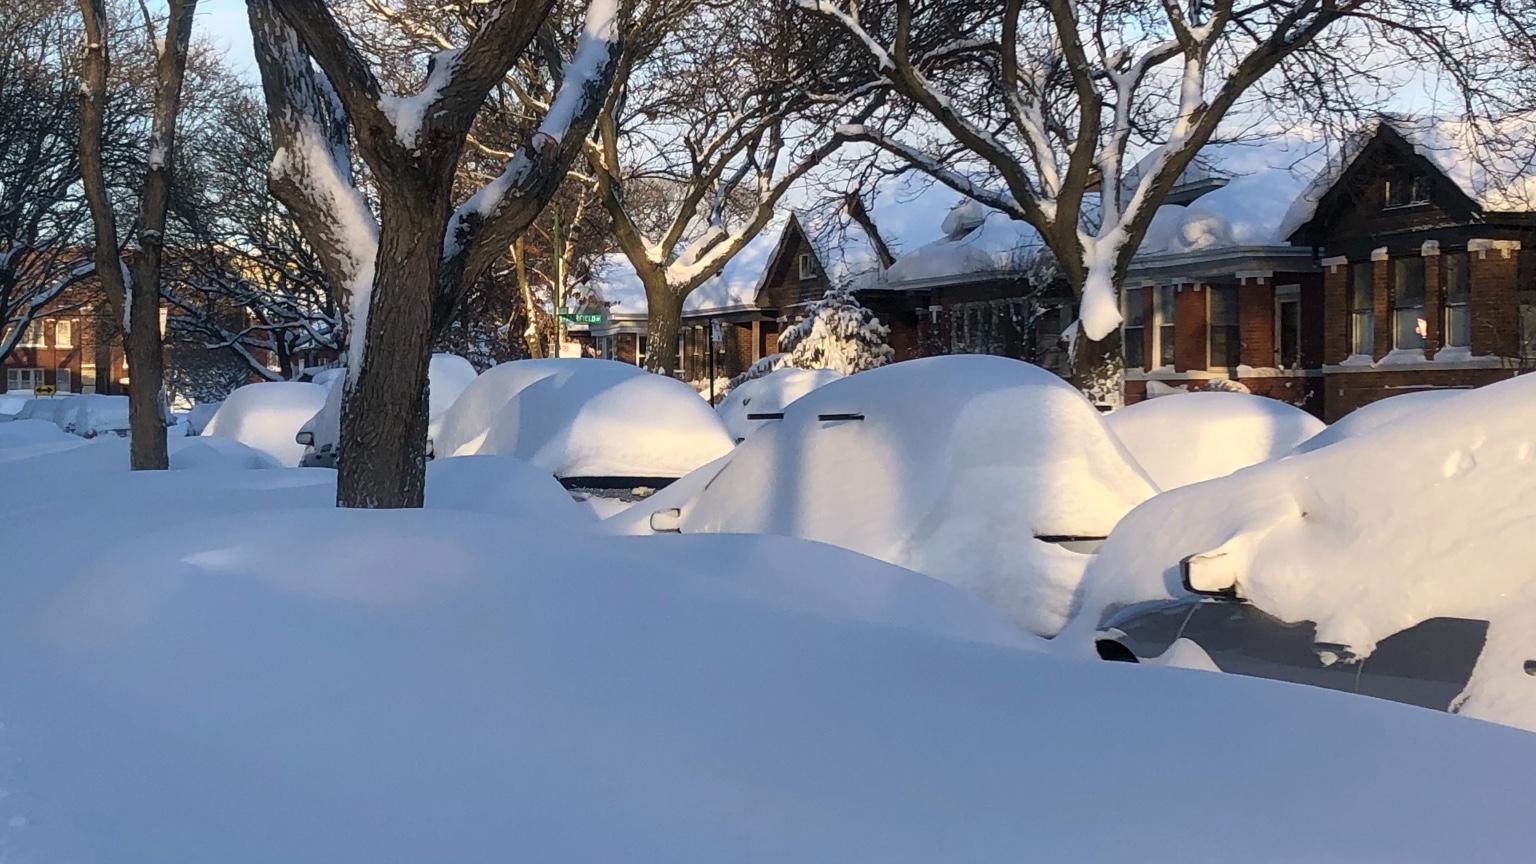 Lincoln Square measured some of Chicago's greatest snowfall, with 17 inches. (Patty Wetli / WTTW News)